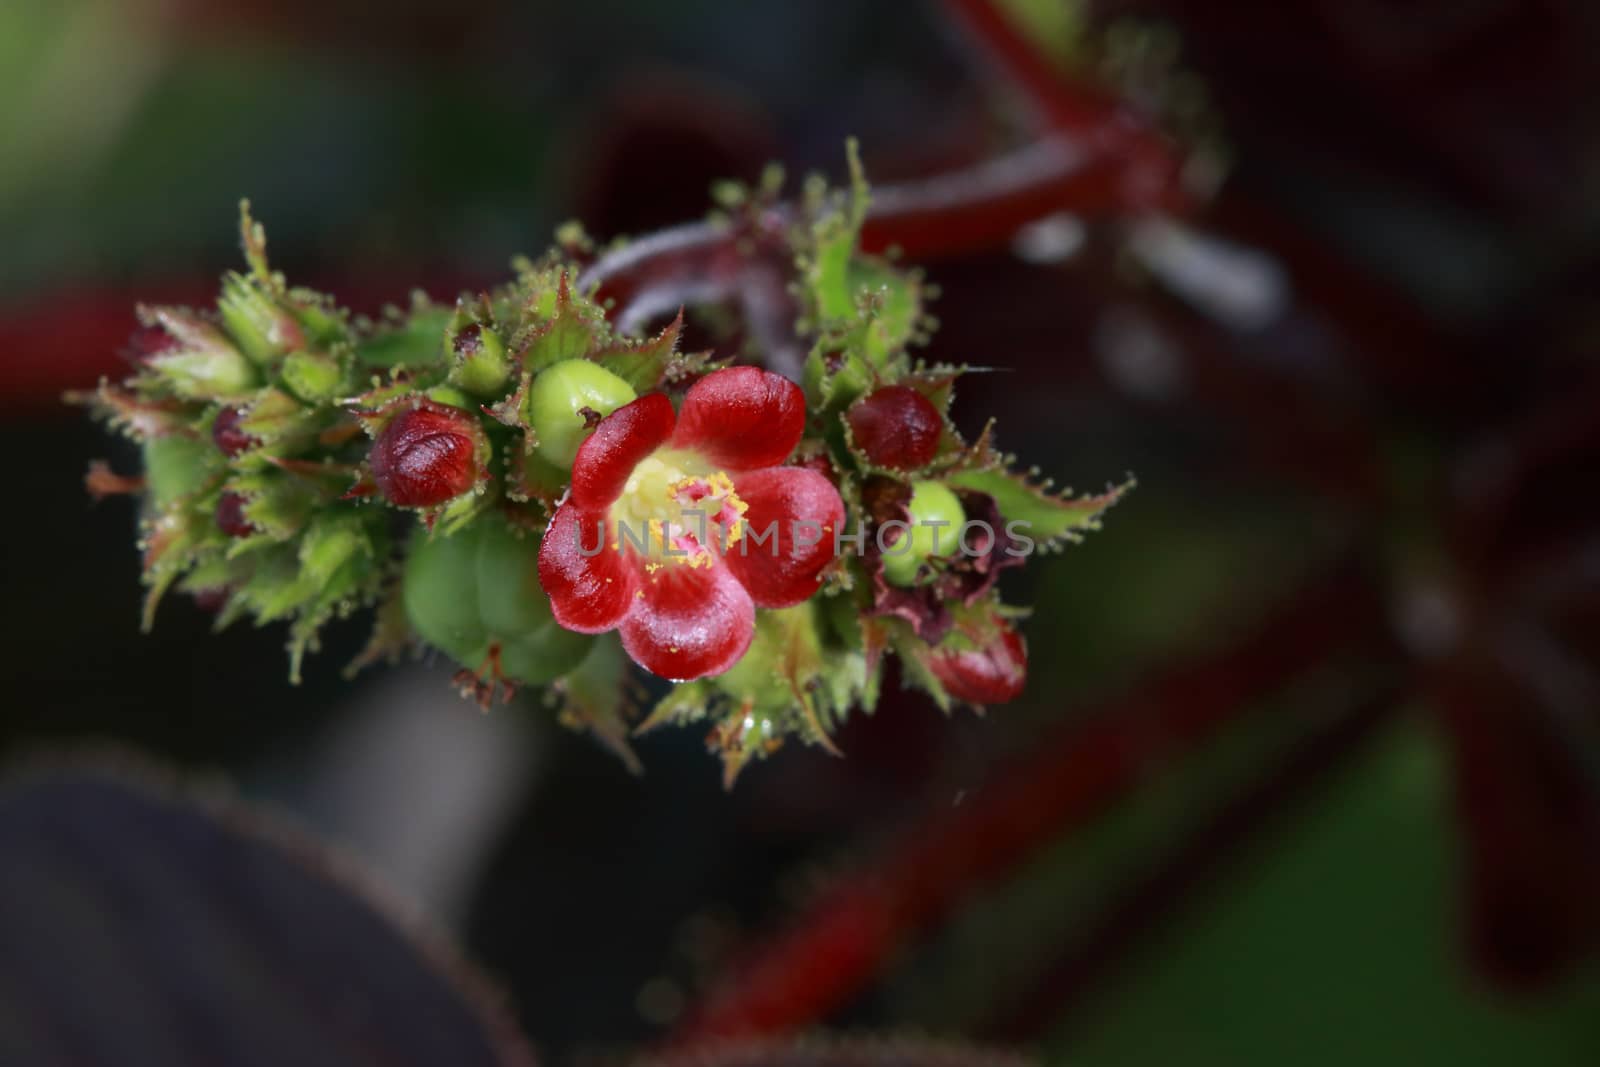 The flower of bellyache bush have red color.